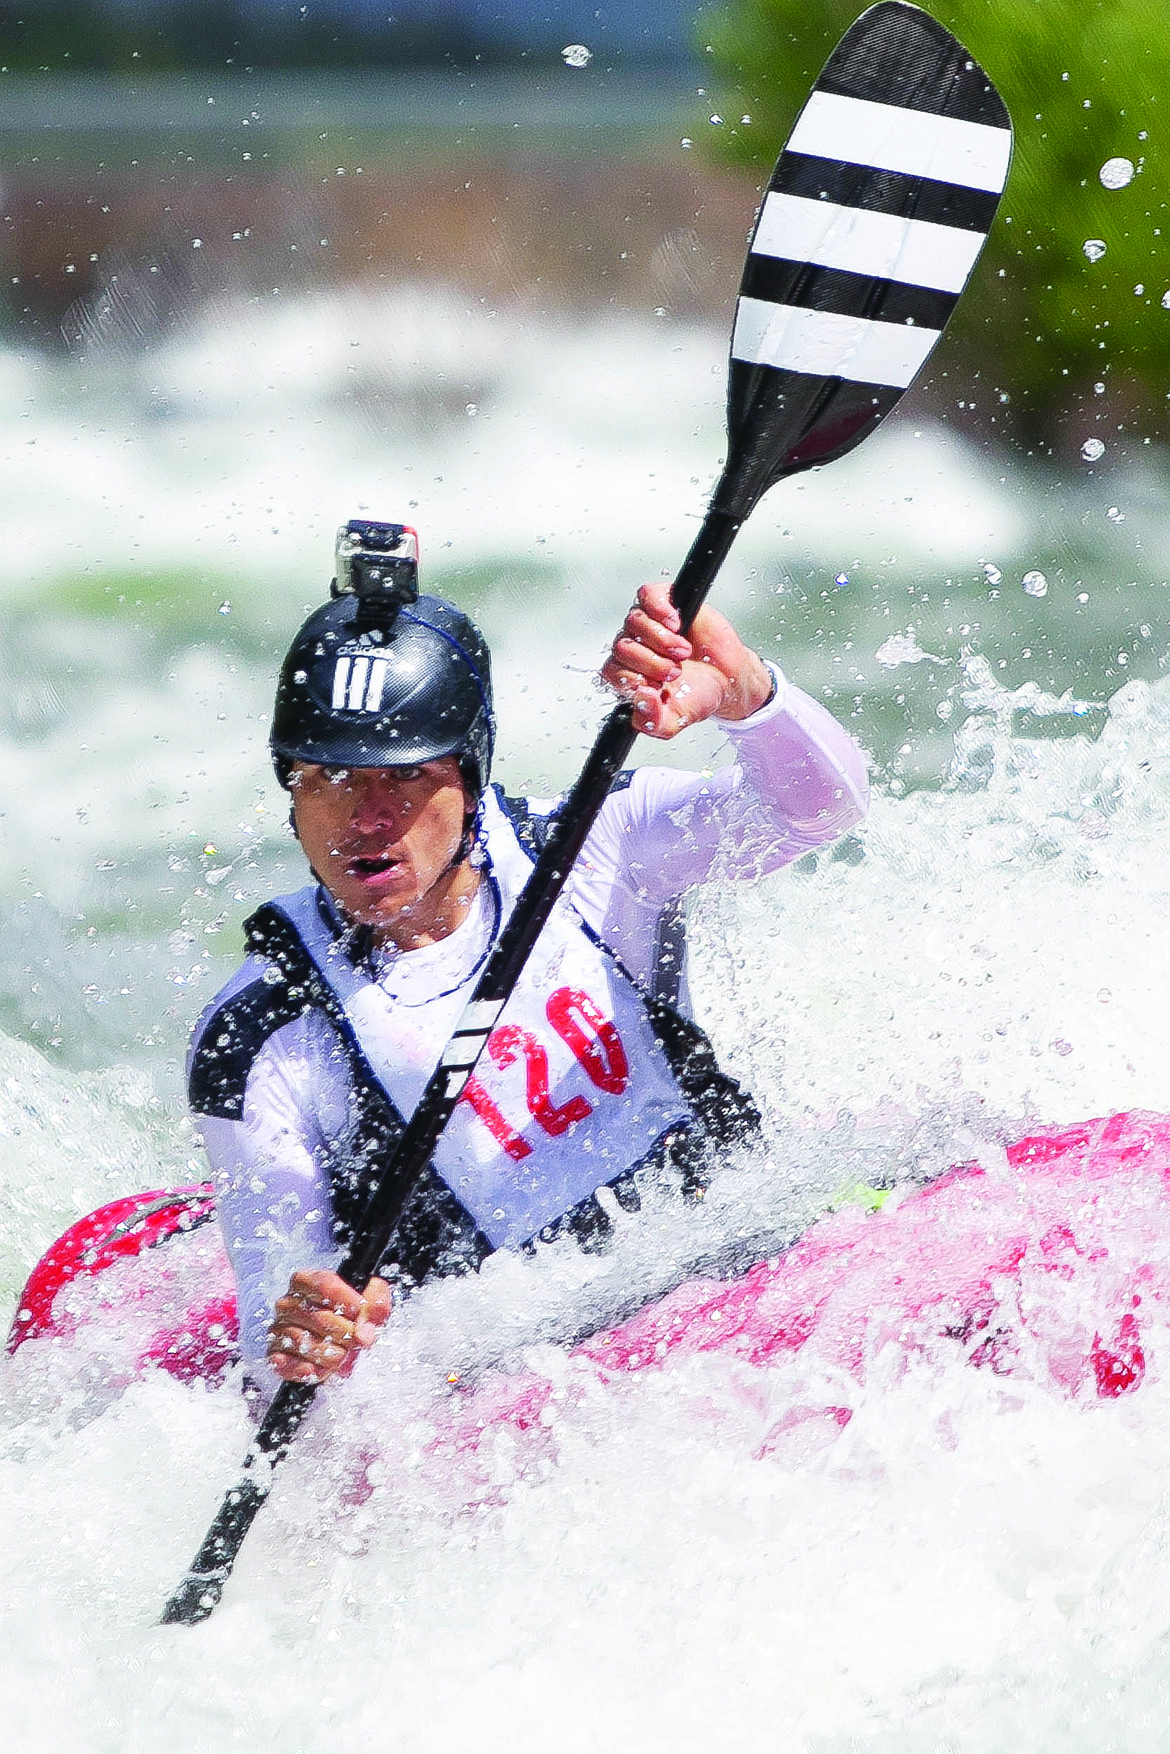 A COMPETITOR navigates the expert slalom course during the 39th Annual Bigfork Whitewater Festival in 2014.
(Patrick Cote/Daily Inter Lake, file)